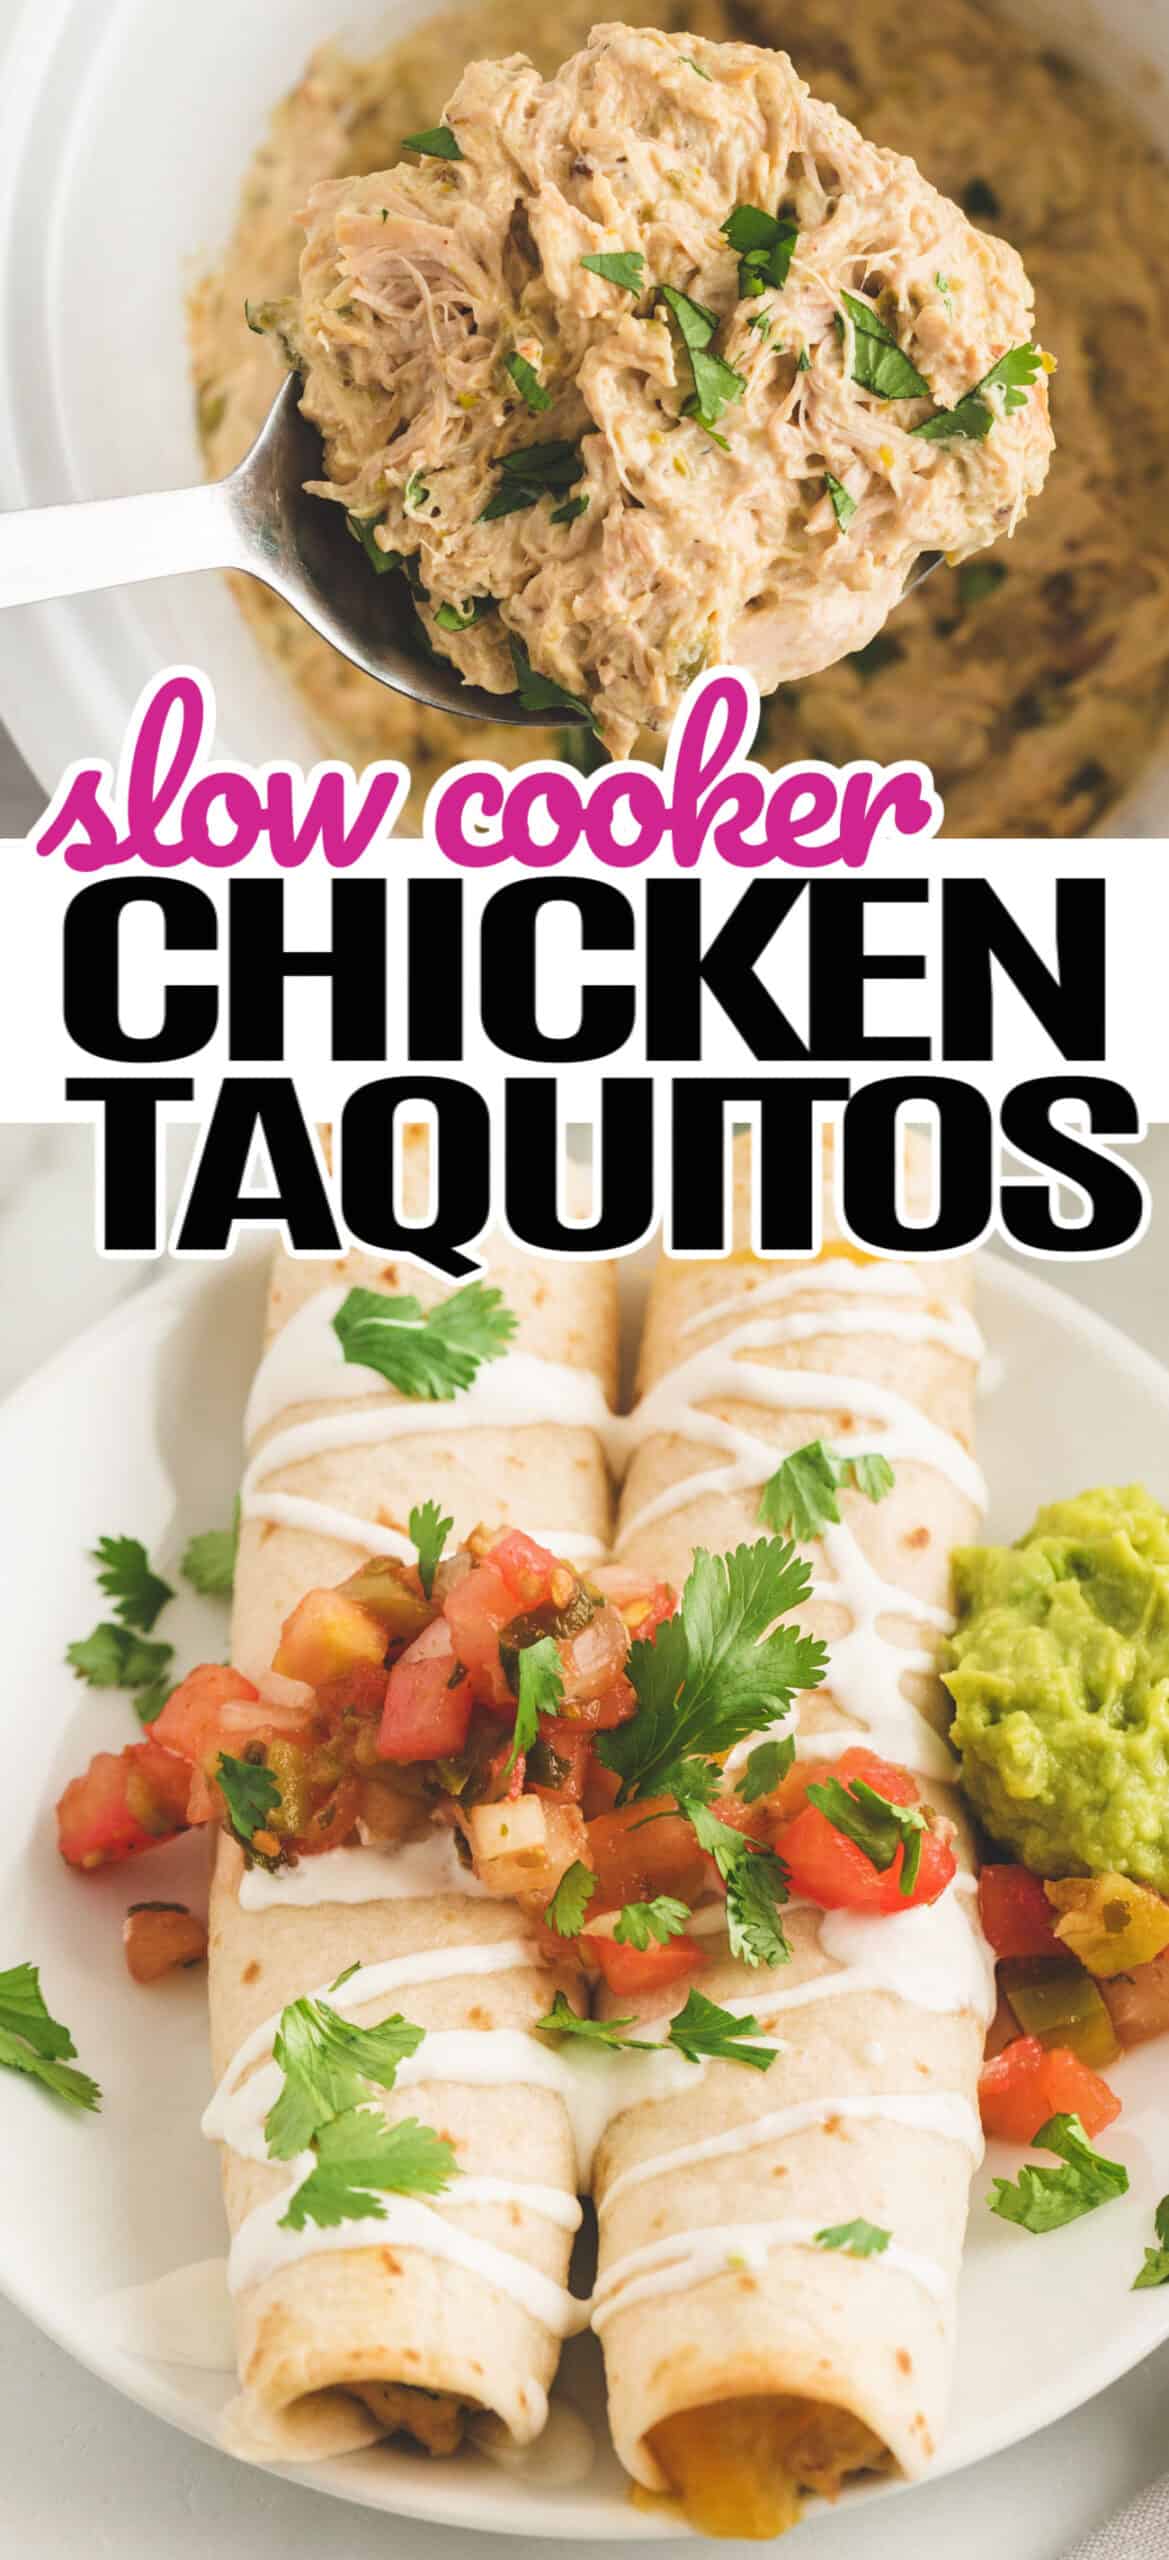 Slow Cooker Chicken Taquitos ⋆ Real Housemoms